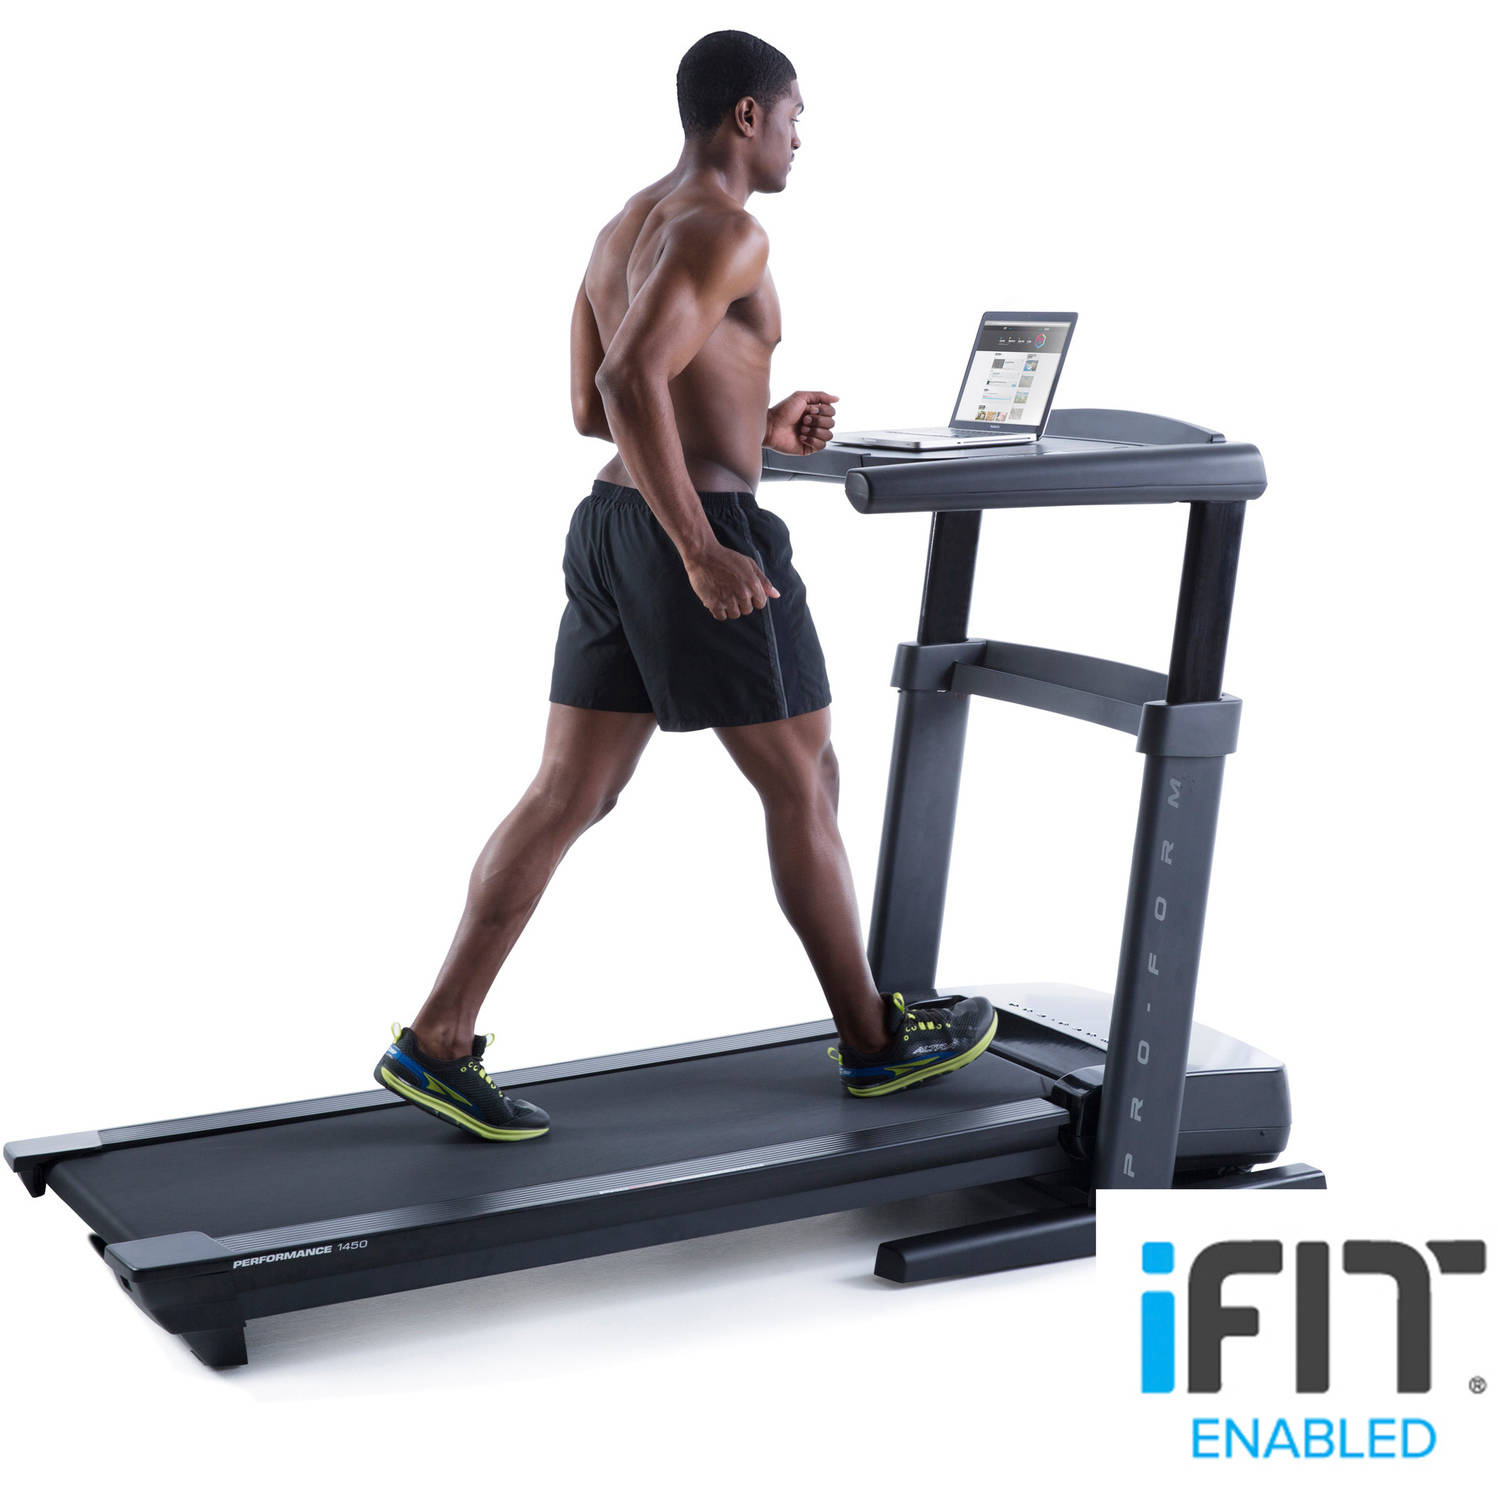 Profrom Performance 140 Treadmill - image 1 of 11